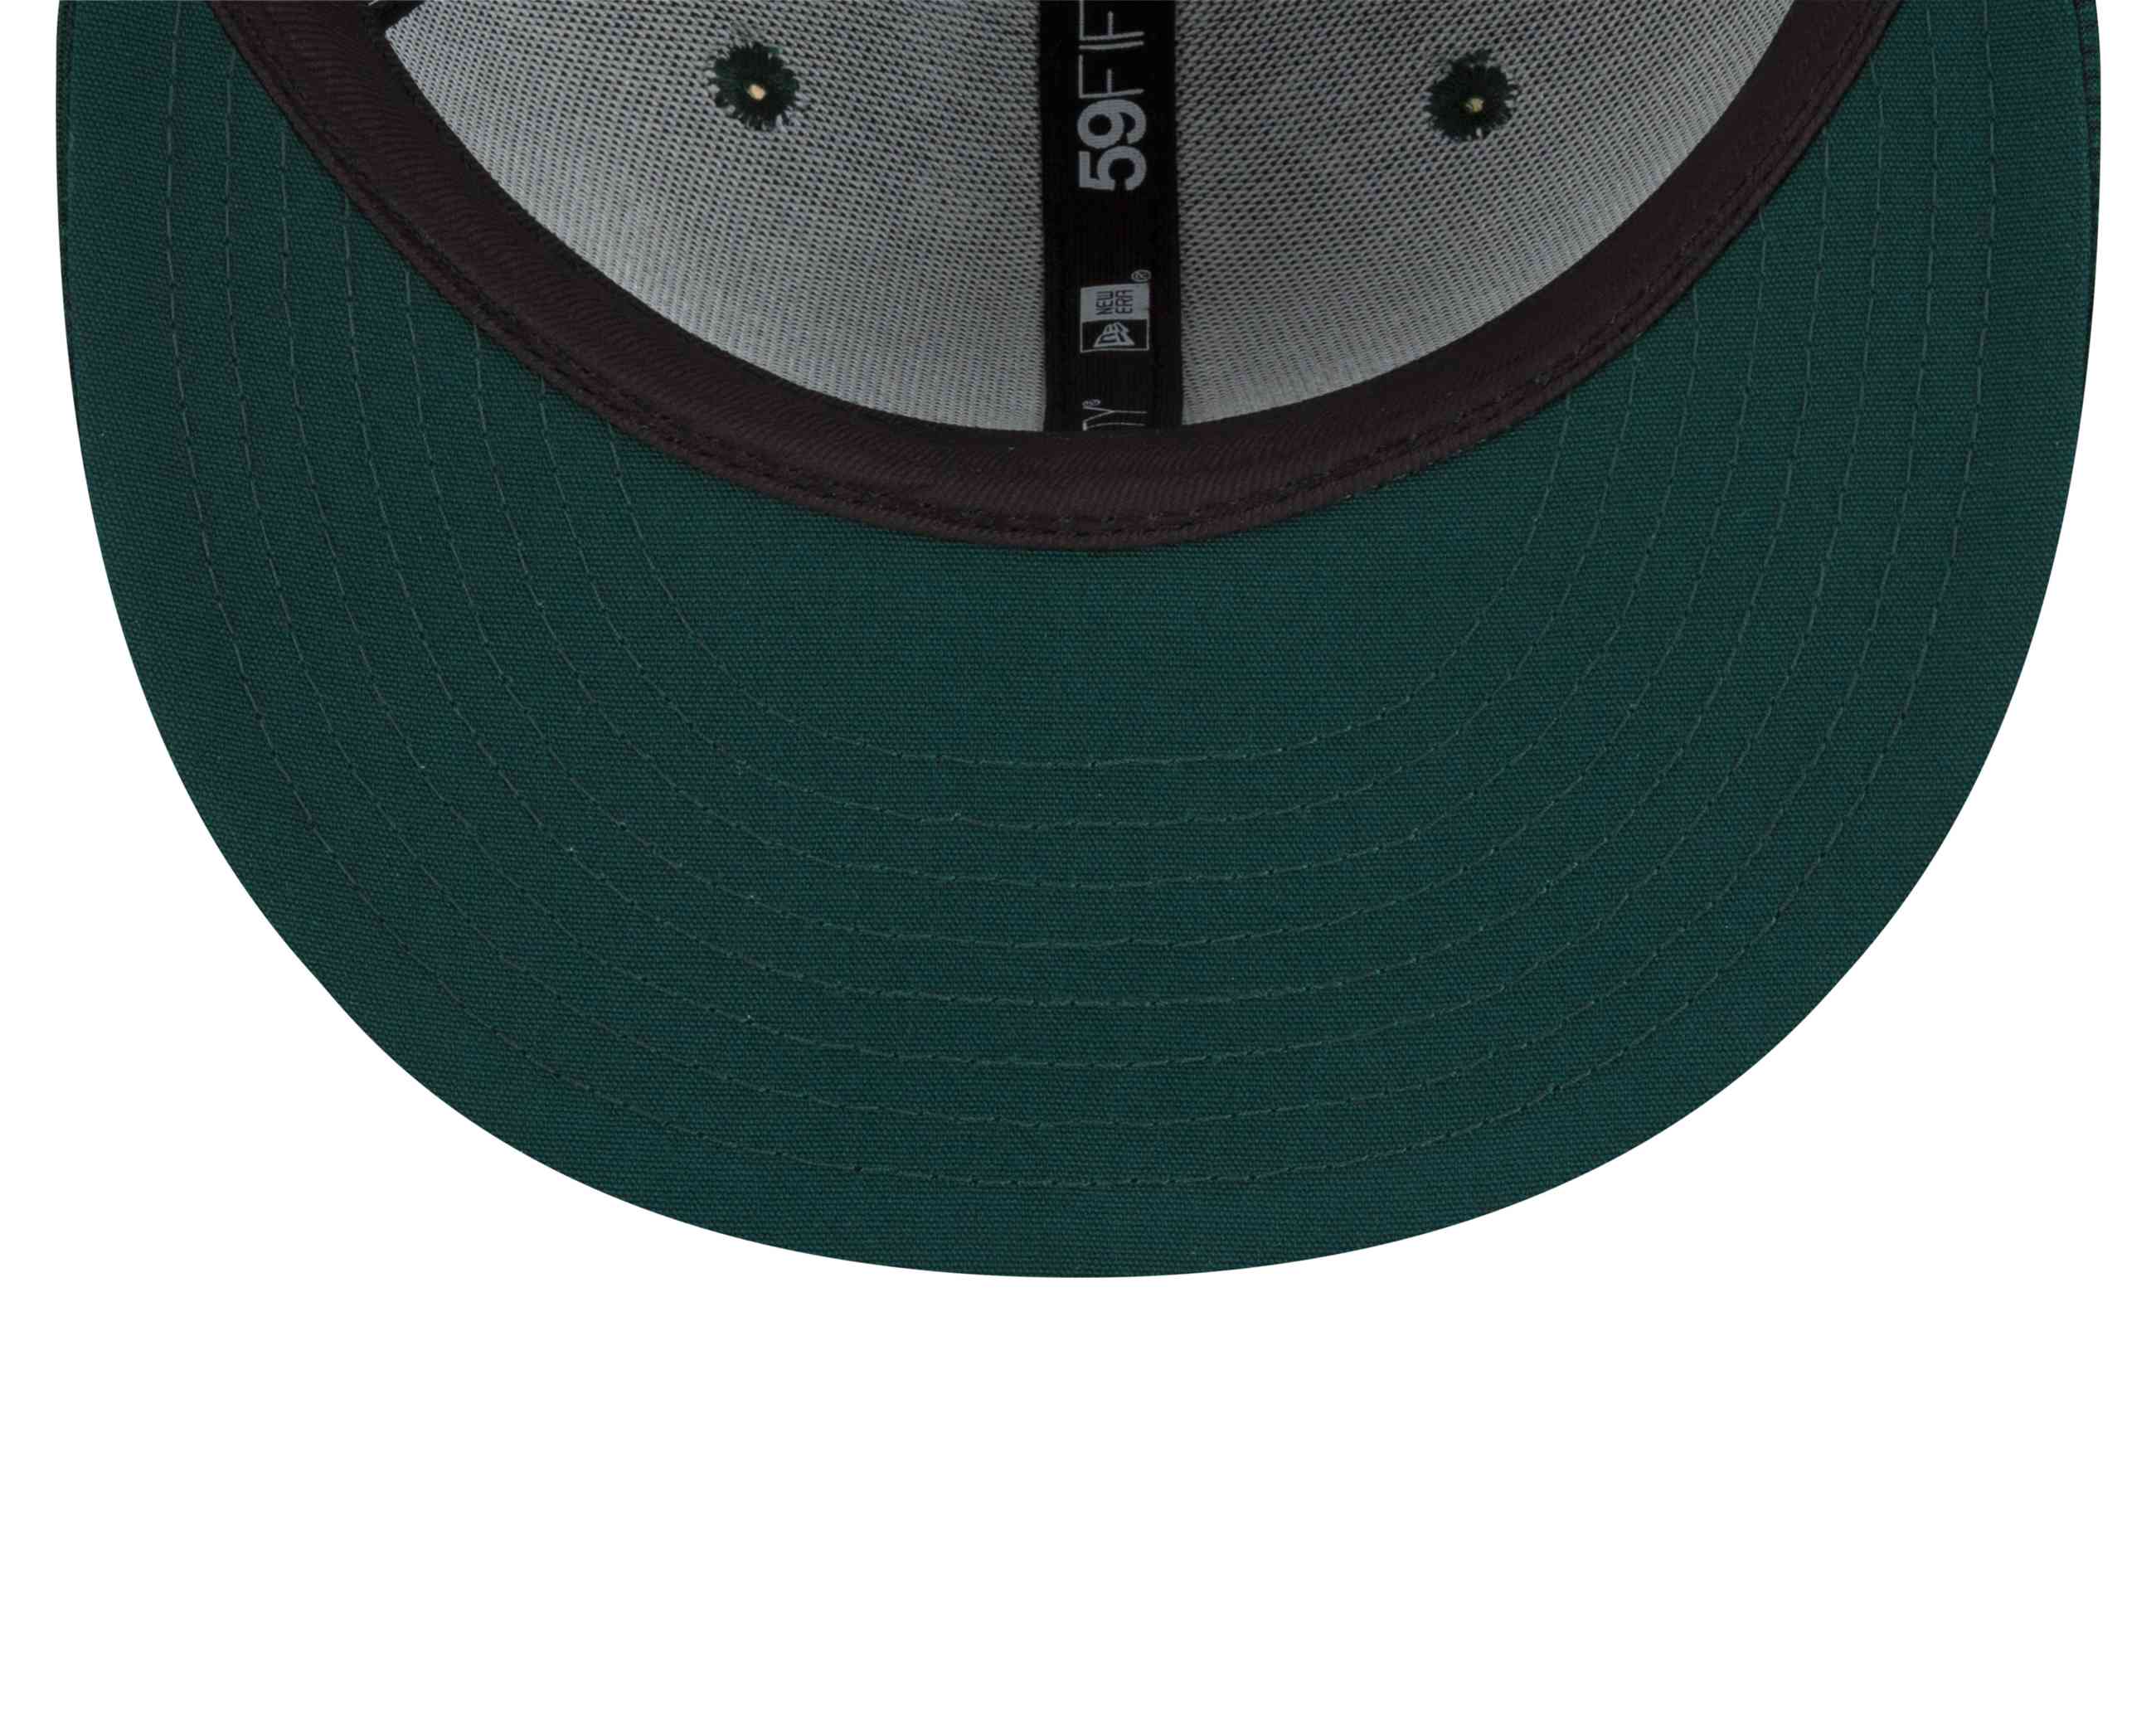 New Era - MLB Oakland Athletics 2022 Clubhouse 59Fifty Fitted Cap